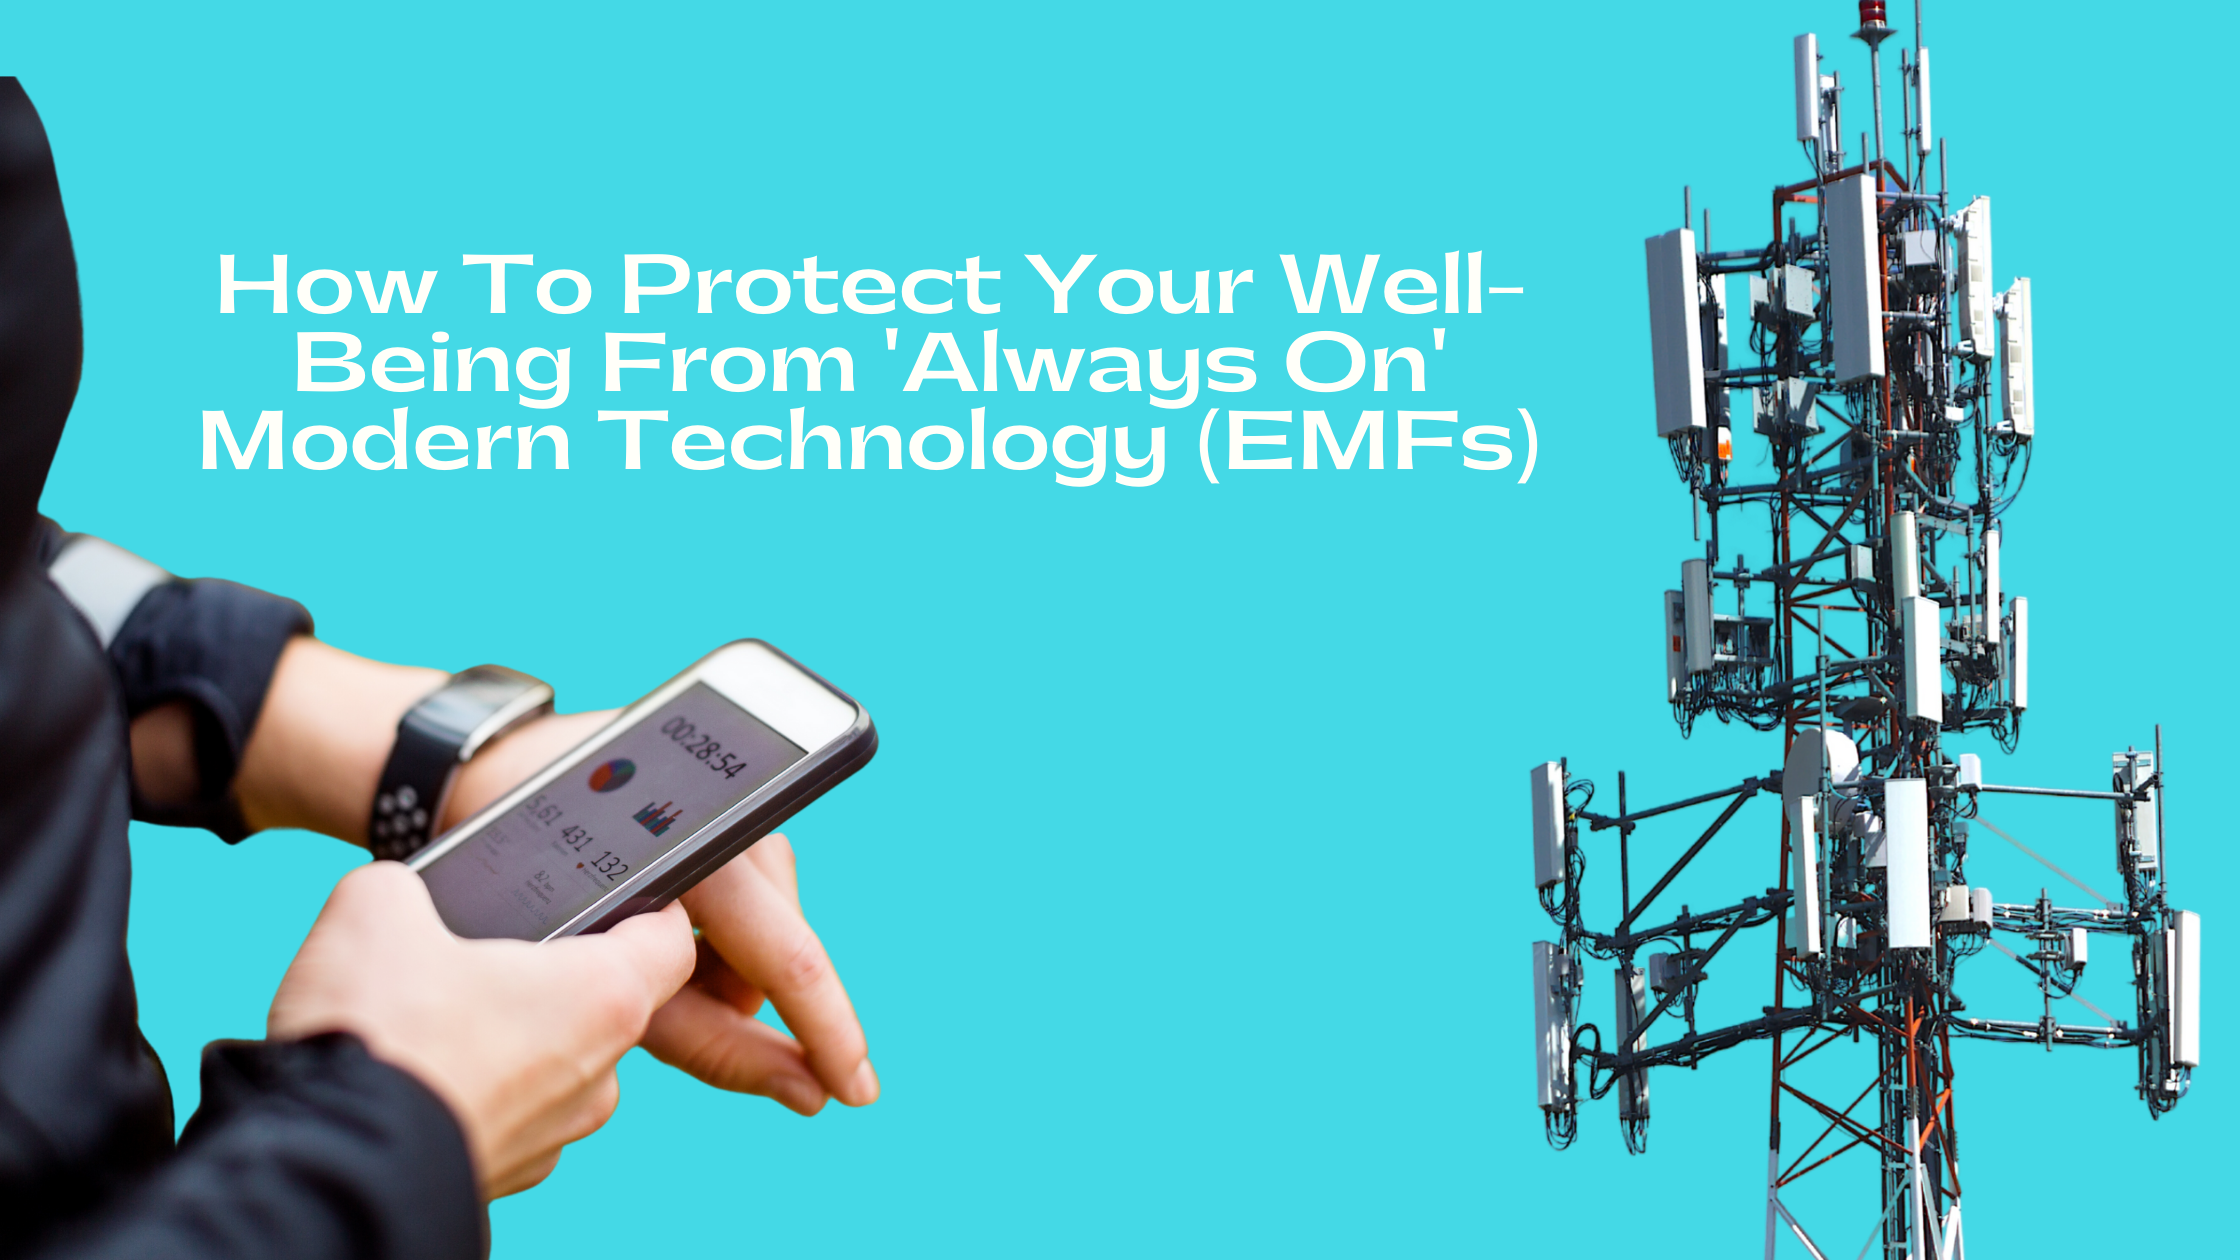 How To Protect Your Well-Being From Modern Tech Electrosmog